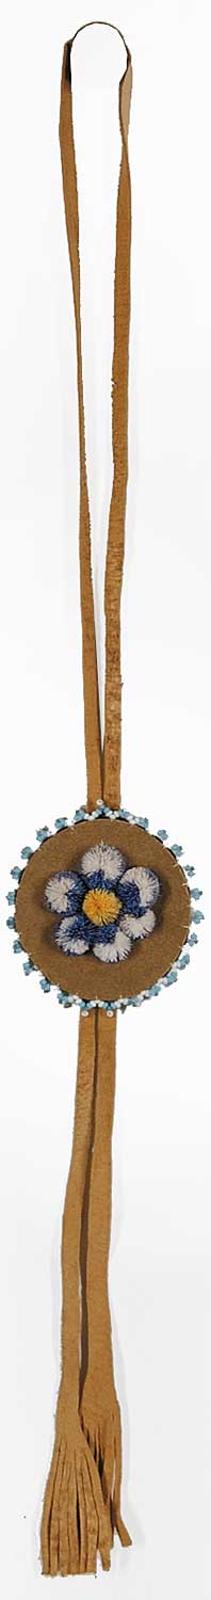 First Nations Basket School - Dyed Moose Hair Bolo Tie